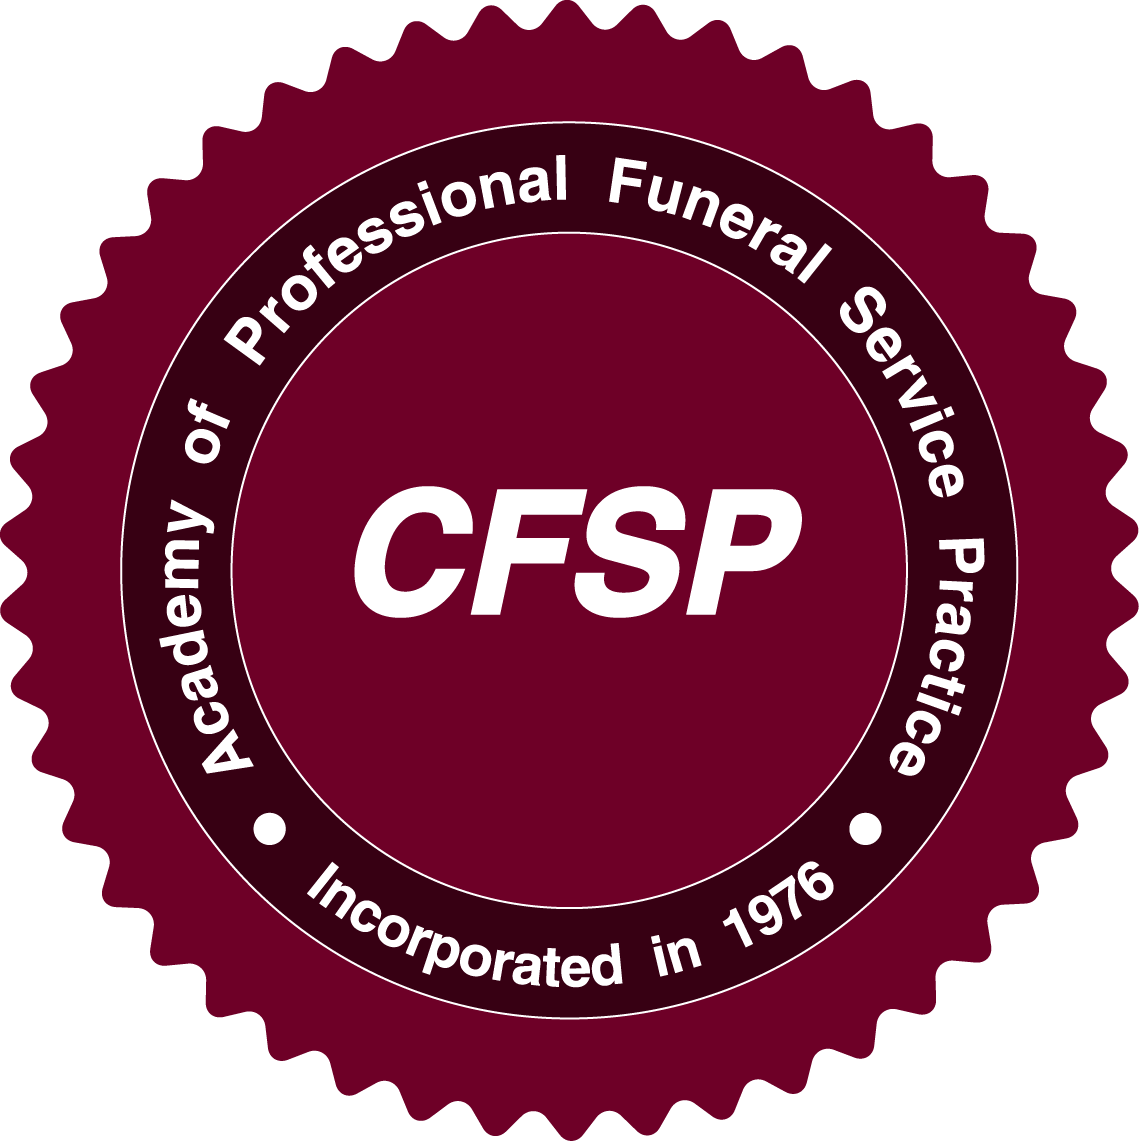 Academy of Professional Funeral Service